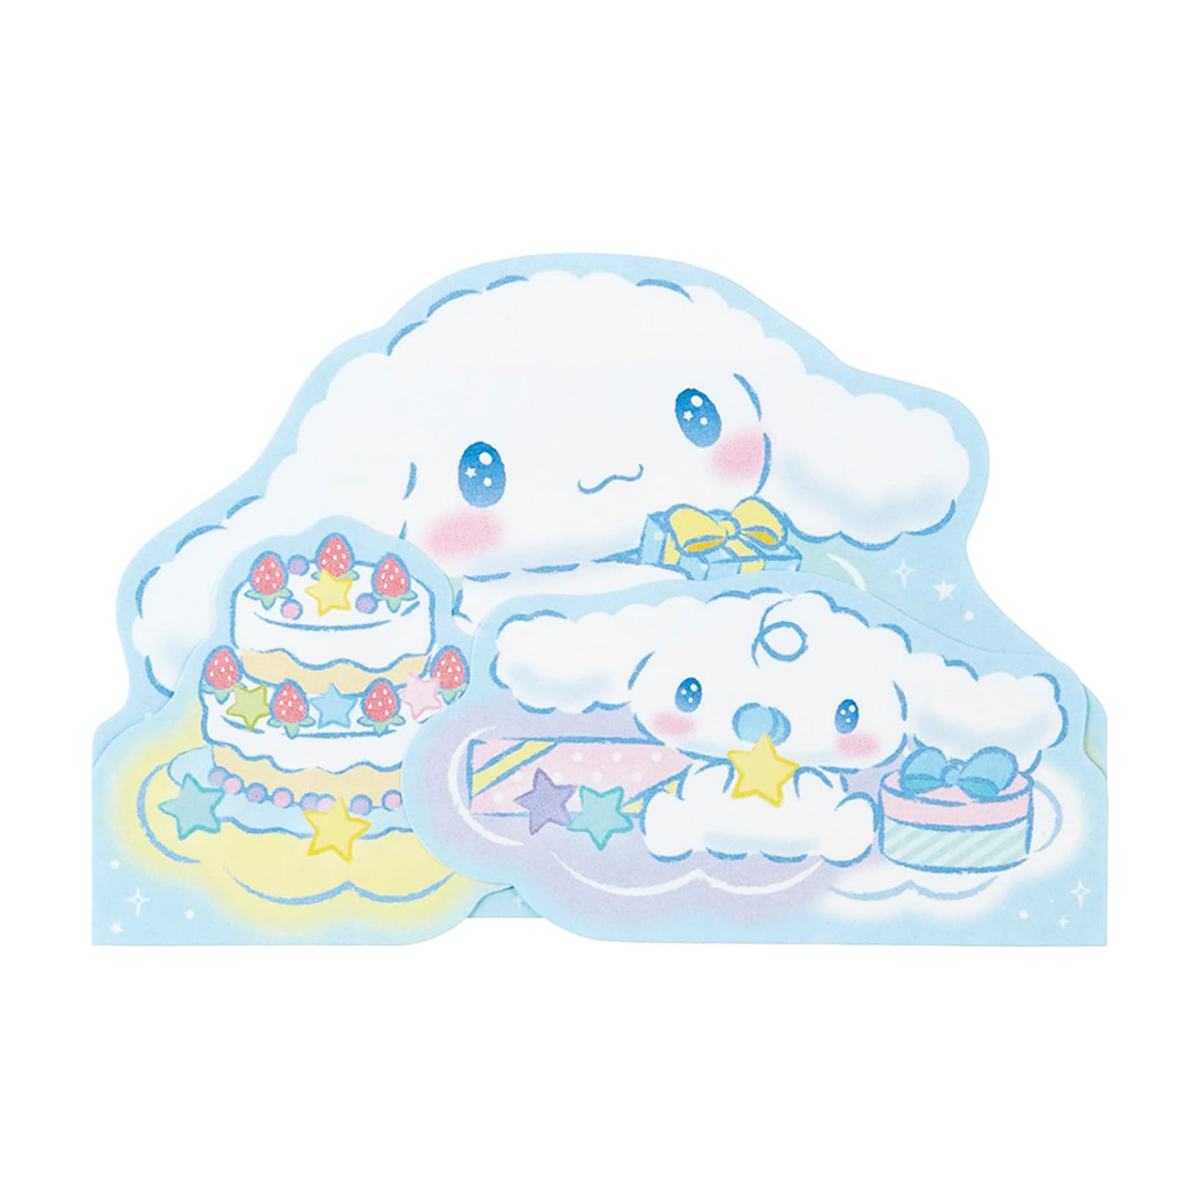 Cinnamoroll Stickers and Greeting Card (Small Gift Series) Stationery Japan Original   